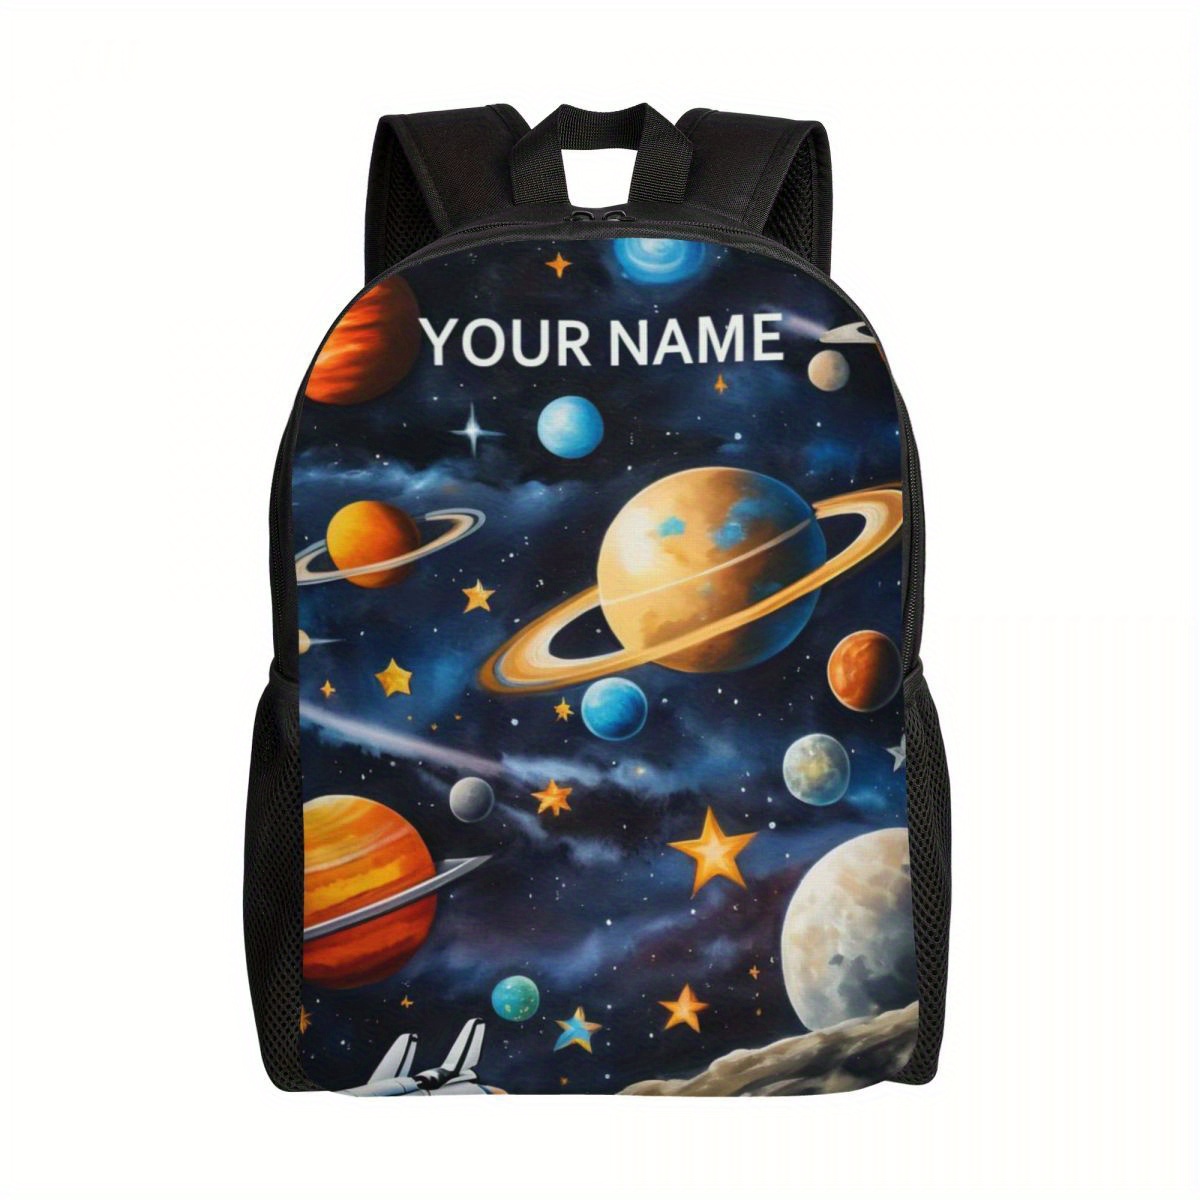 

Custom Backpack For Men And Women, Personalized Universe Planet Backpack, Add Your Name Customized Student Book Bag For Travel, Work And School